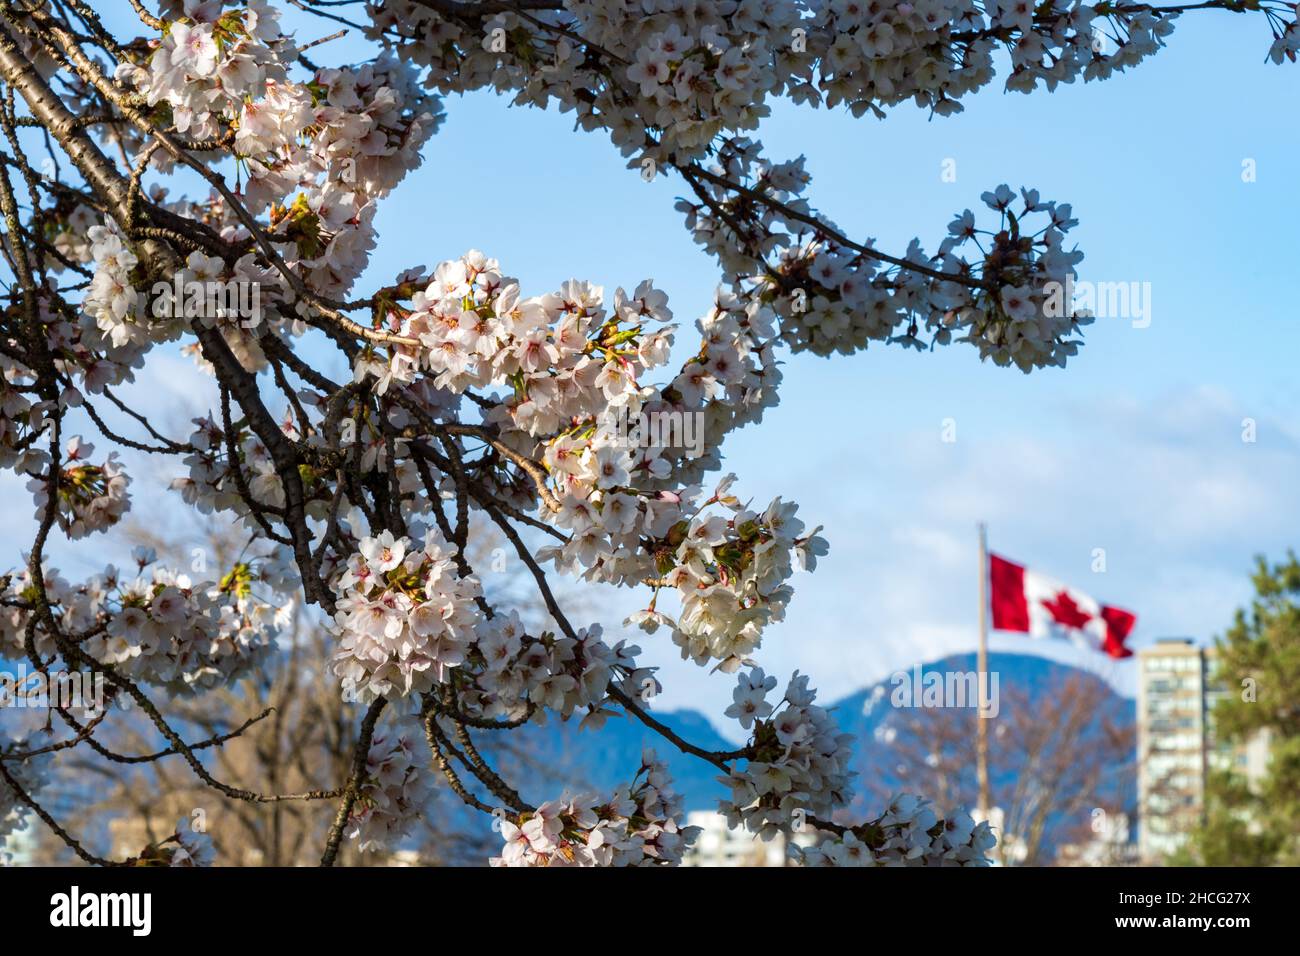 Close up National Flag of Canada and cherry blossoms in full bloom. Concept of canadian urban city life in spring time. Stock Photo